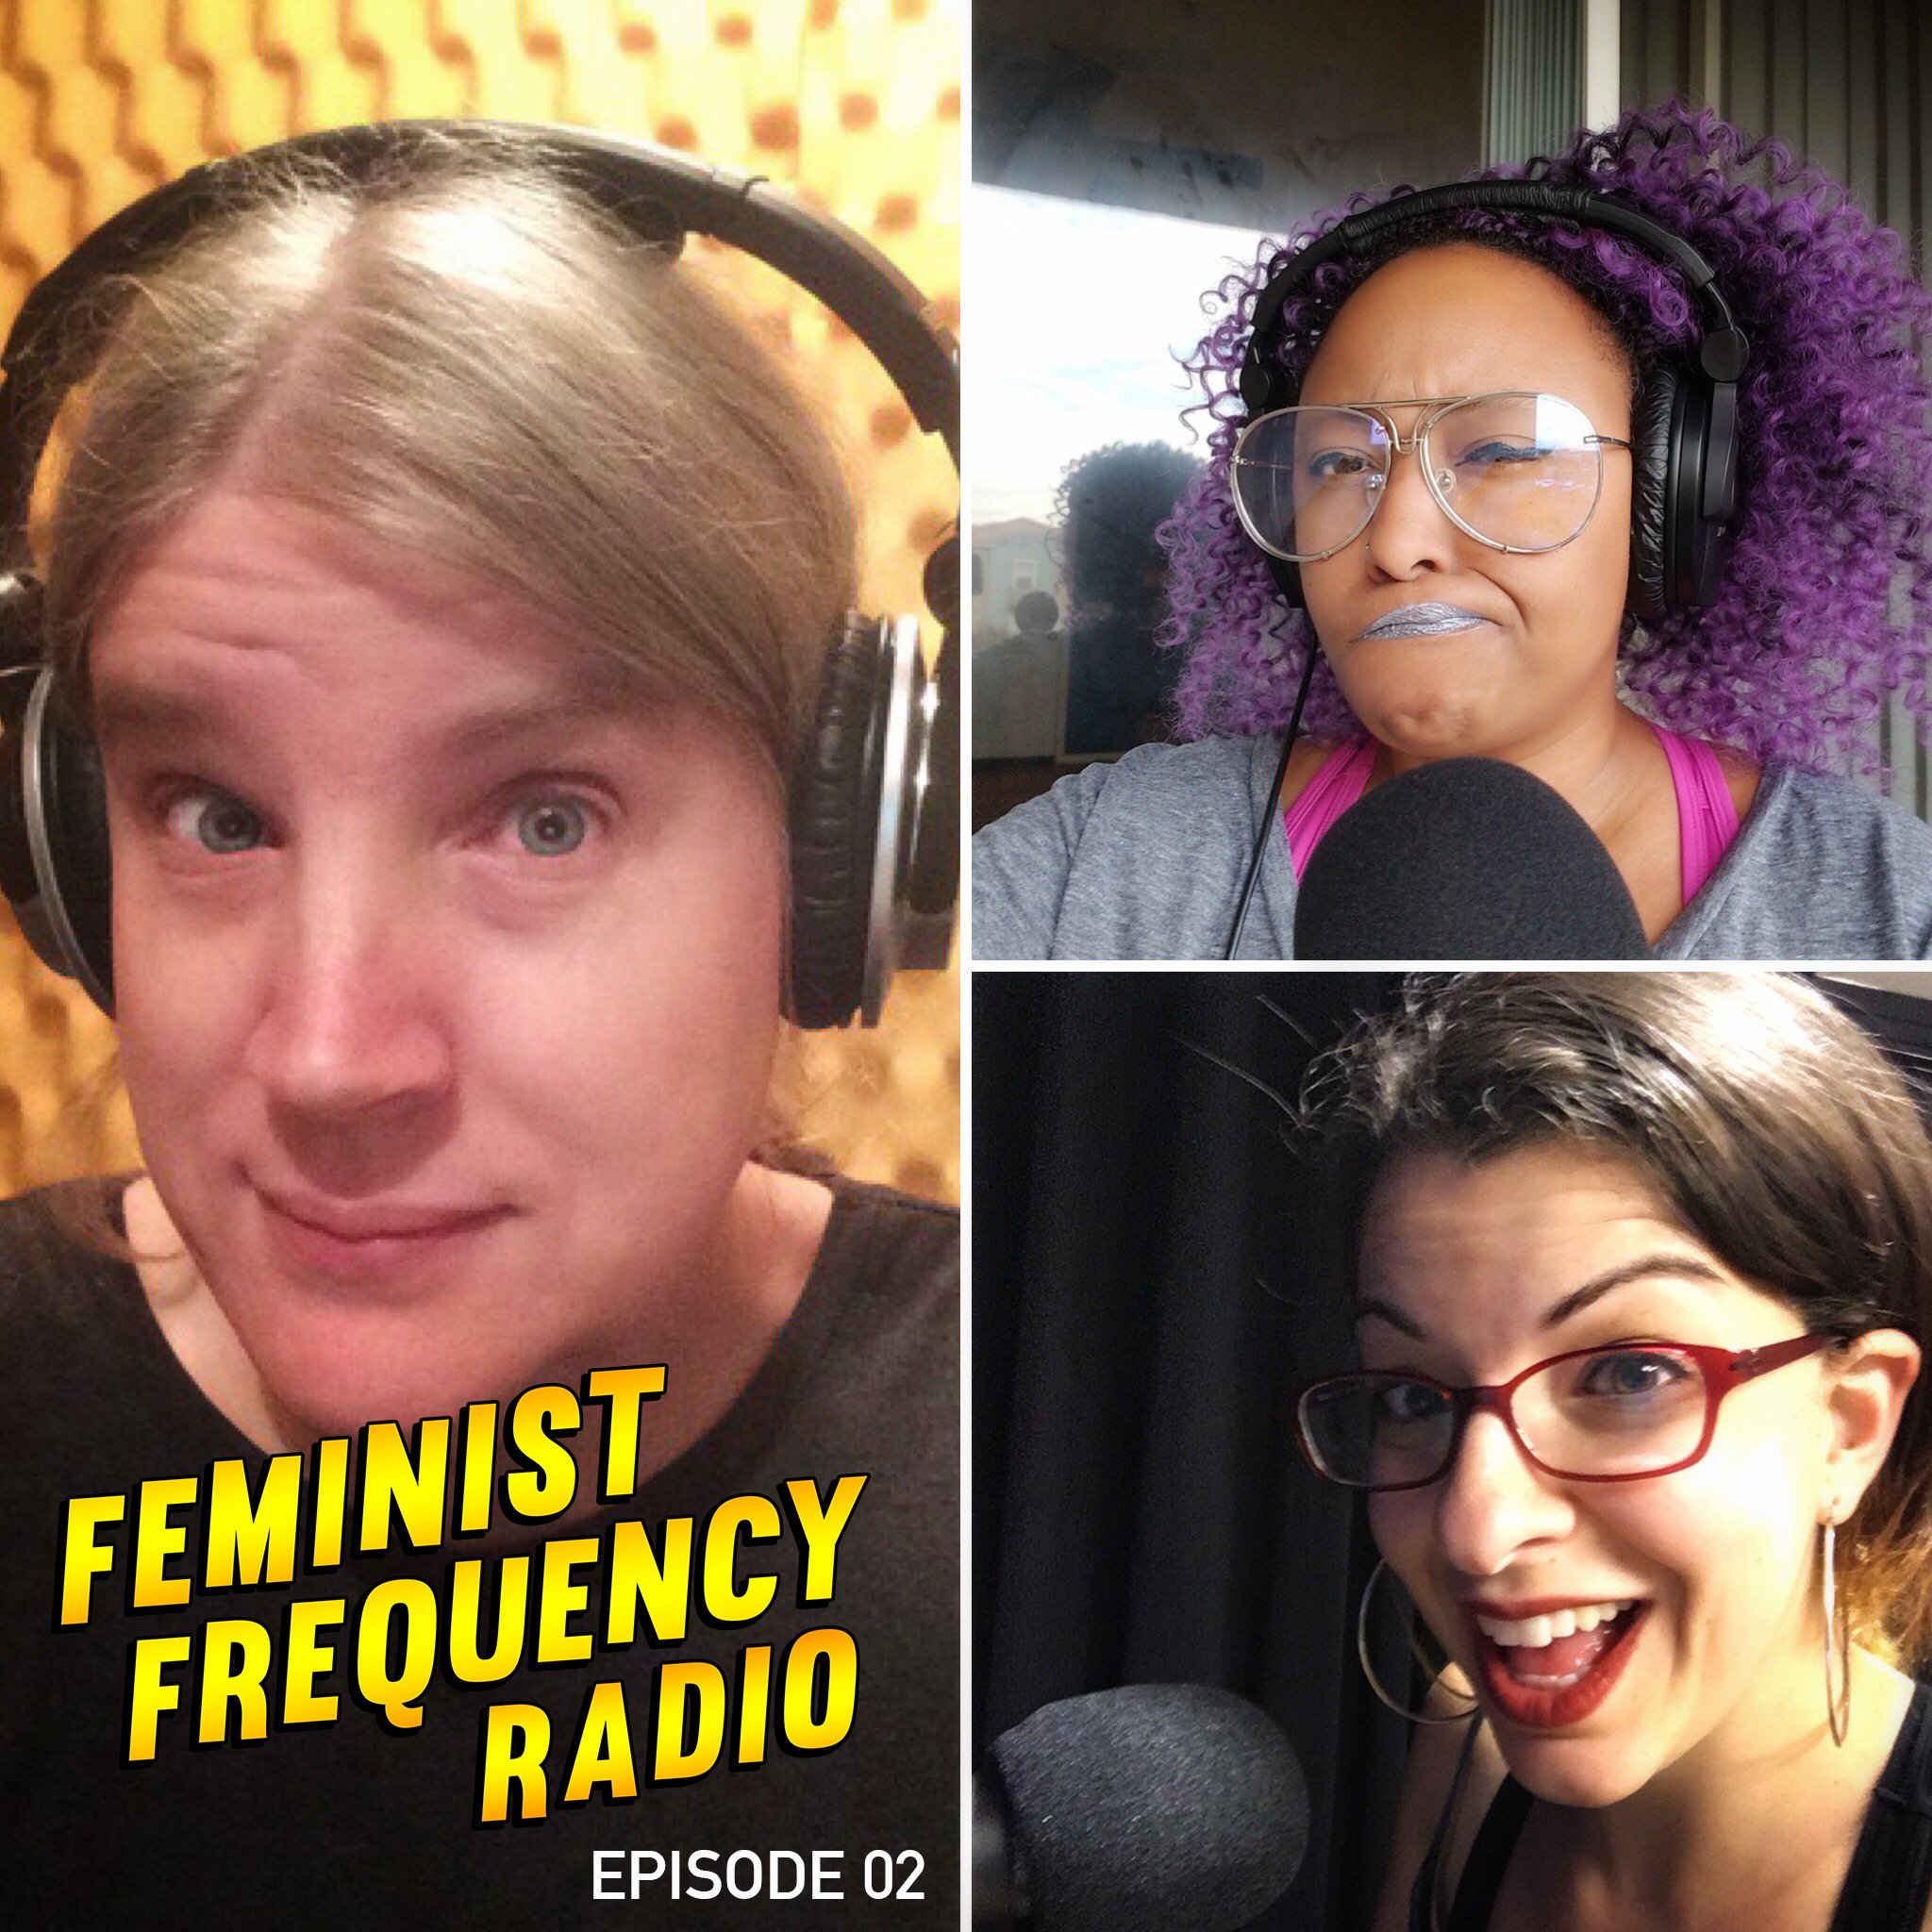 Feminist Frequency